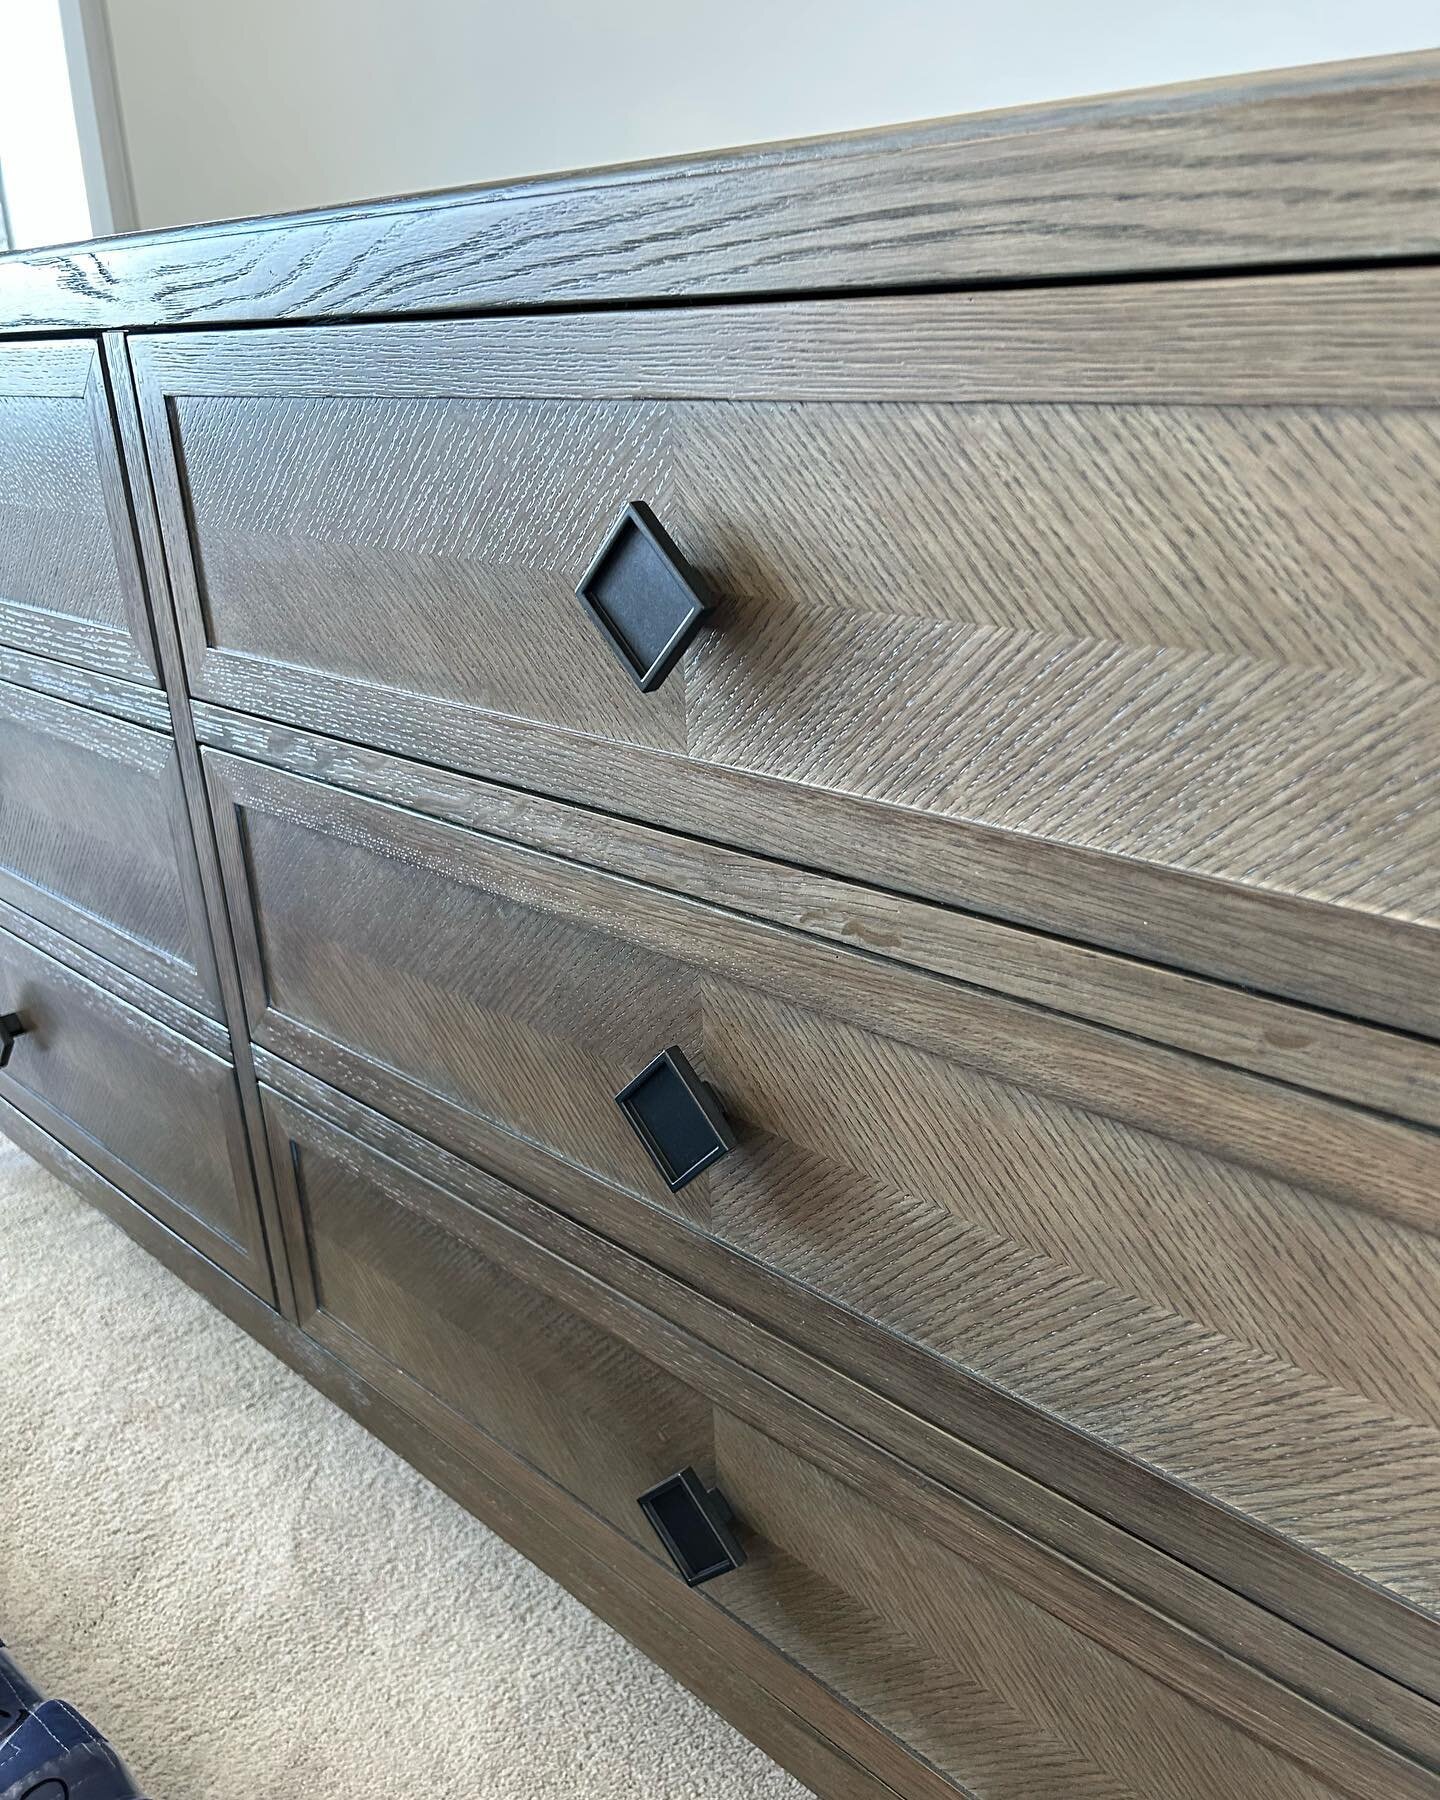 A glimpse at one of the many pieces installed today. We designed this dresser with @vanguardfurniture Make it Yours system and it turned out gorgeous!🤩

Is it that time to renew your home? Contact us to schedule a consultation and see how Homestyles